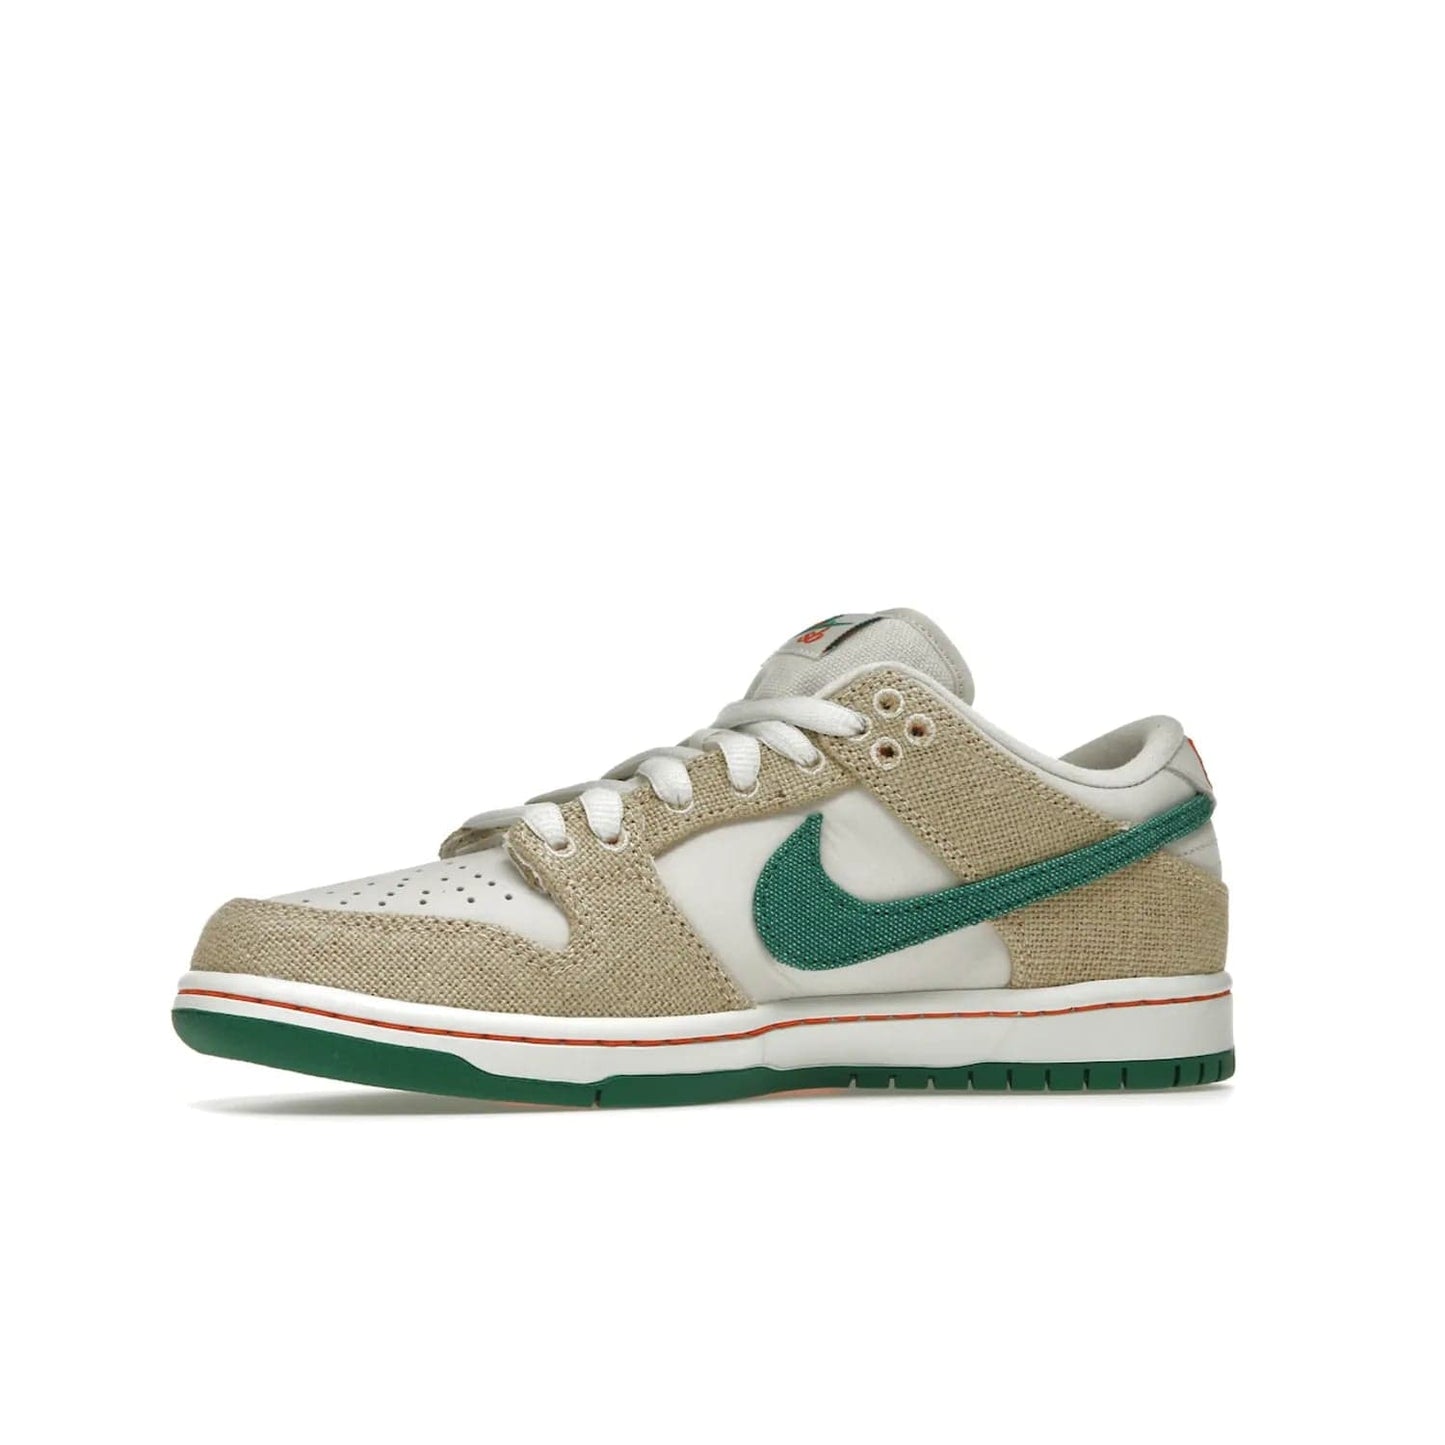 Nike SB Dunk Low Jarritos - Image 17 - Only at www.BallersClubKickz.com - Shop limited edition Nike SB Dunk Low Jarritos! Crafted with white leather and tear-away canvas materials with green accents. Includes orange, green, and white laces to customize your look. Available now.